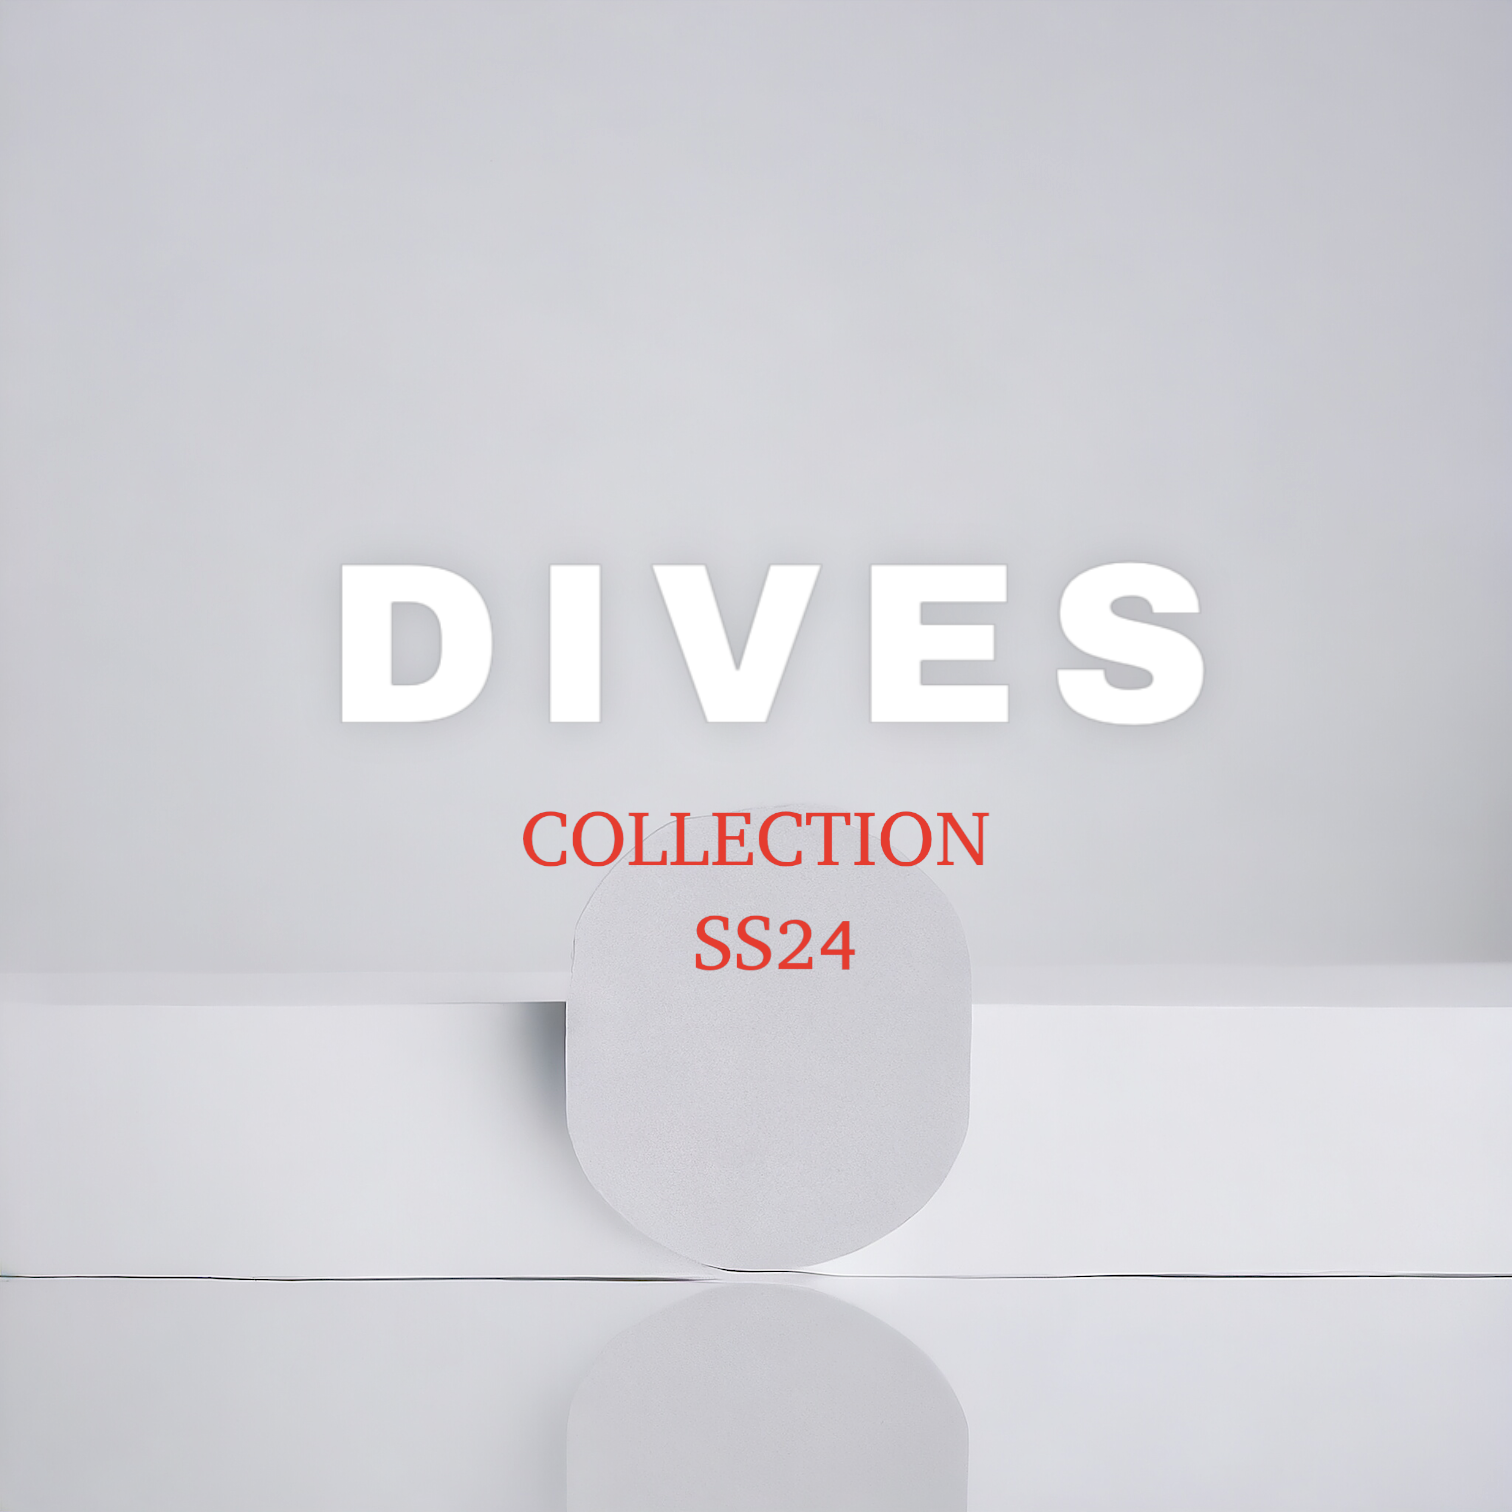 Collection SS24 - DIVES